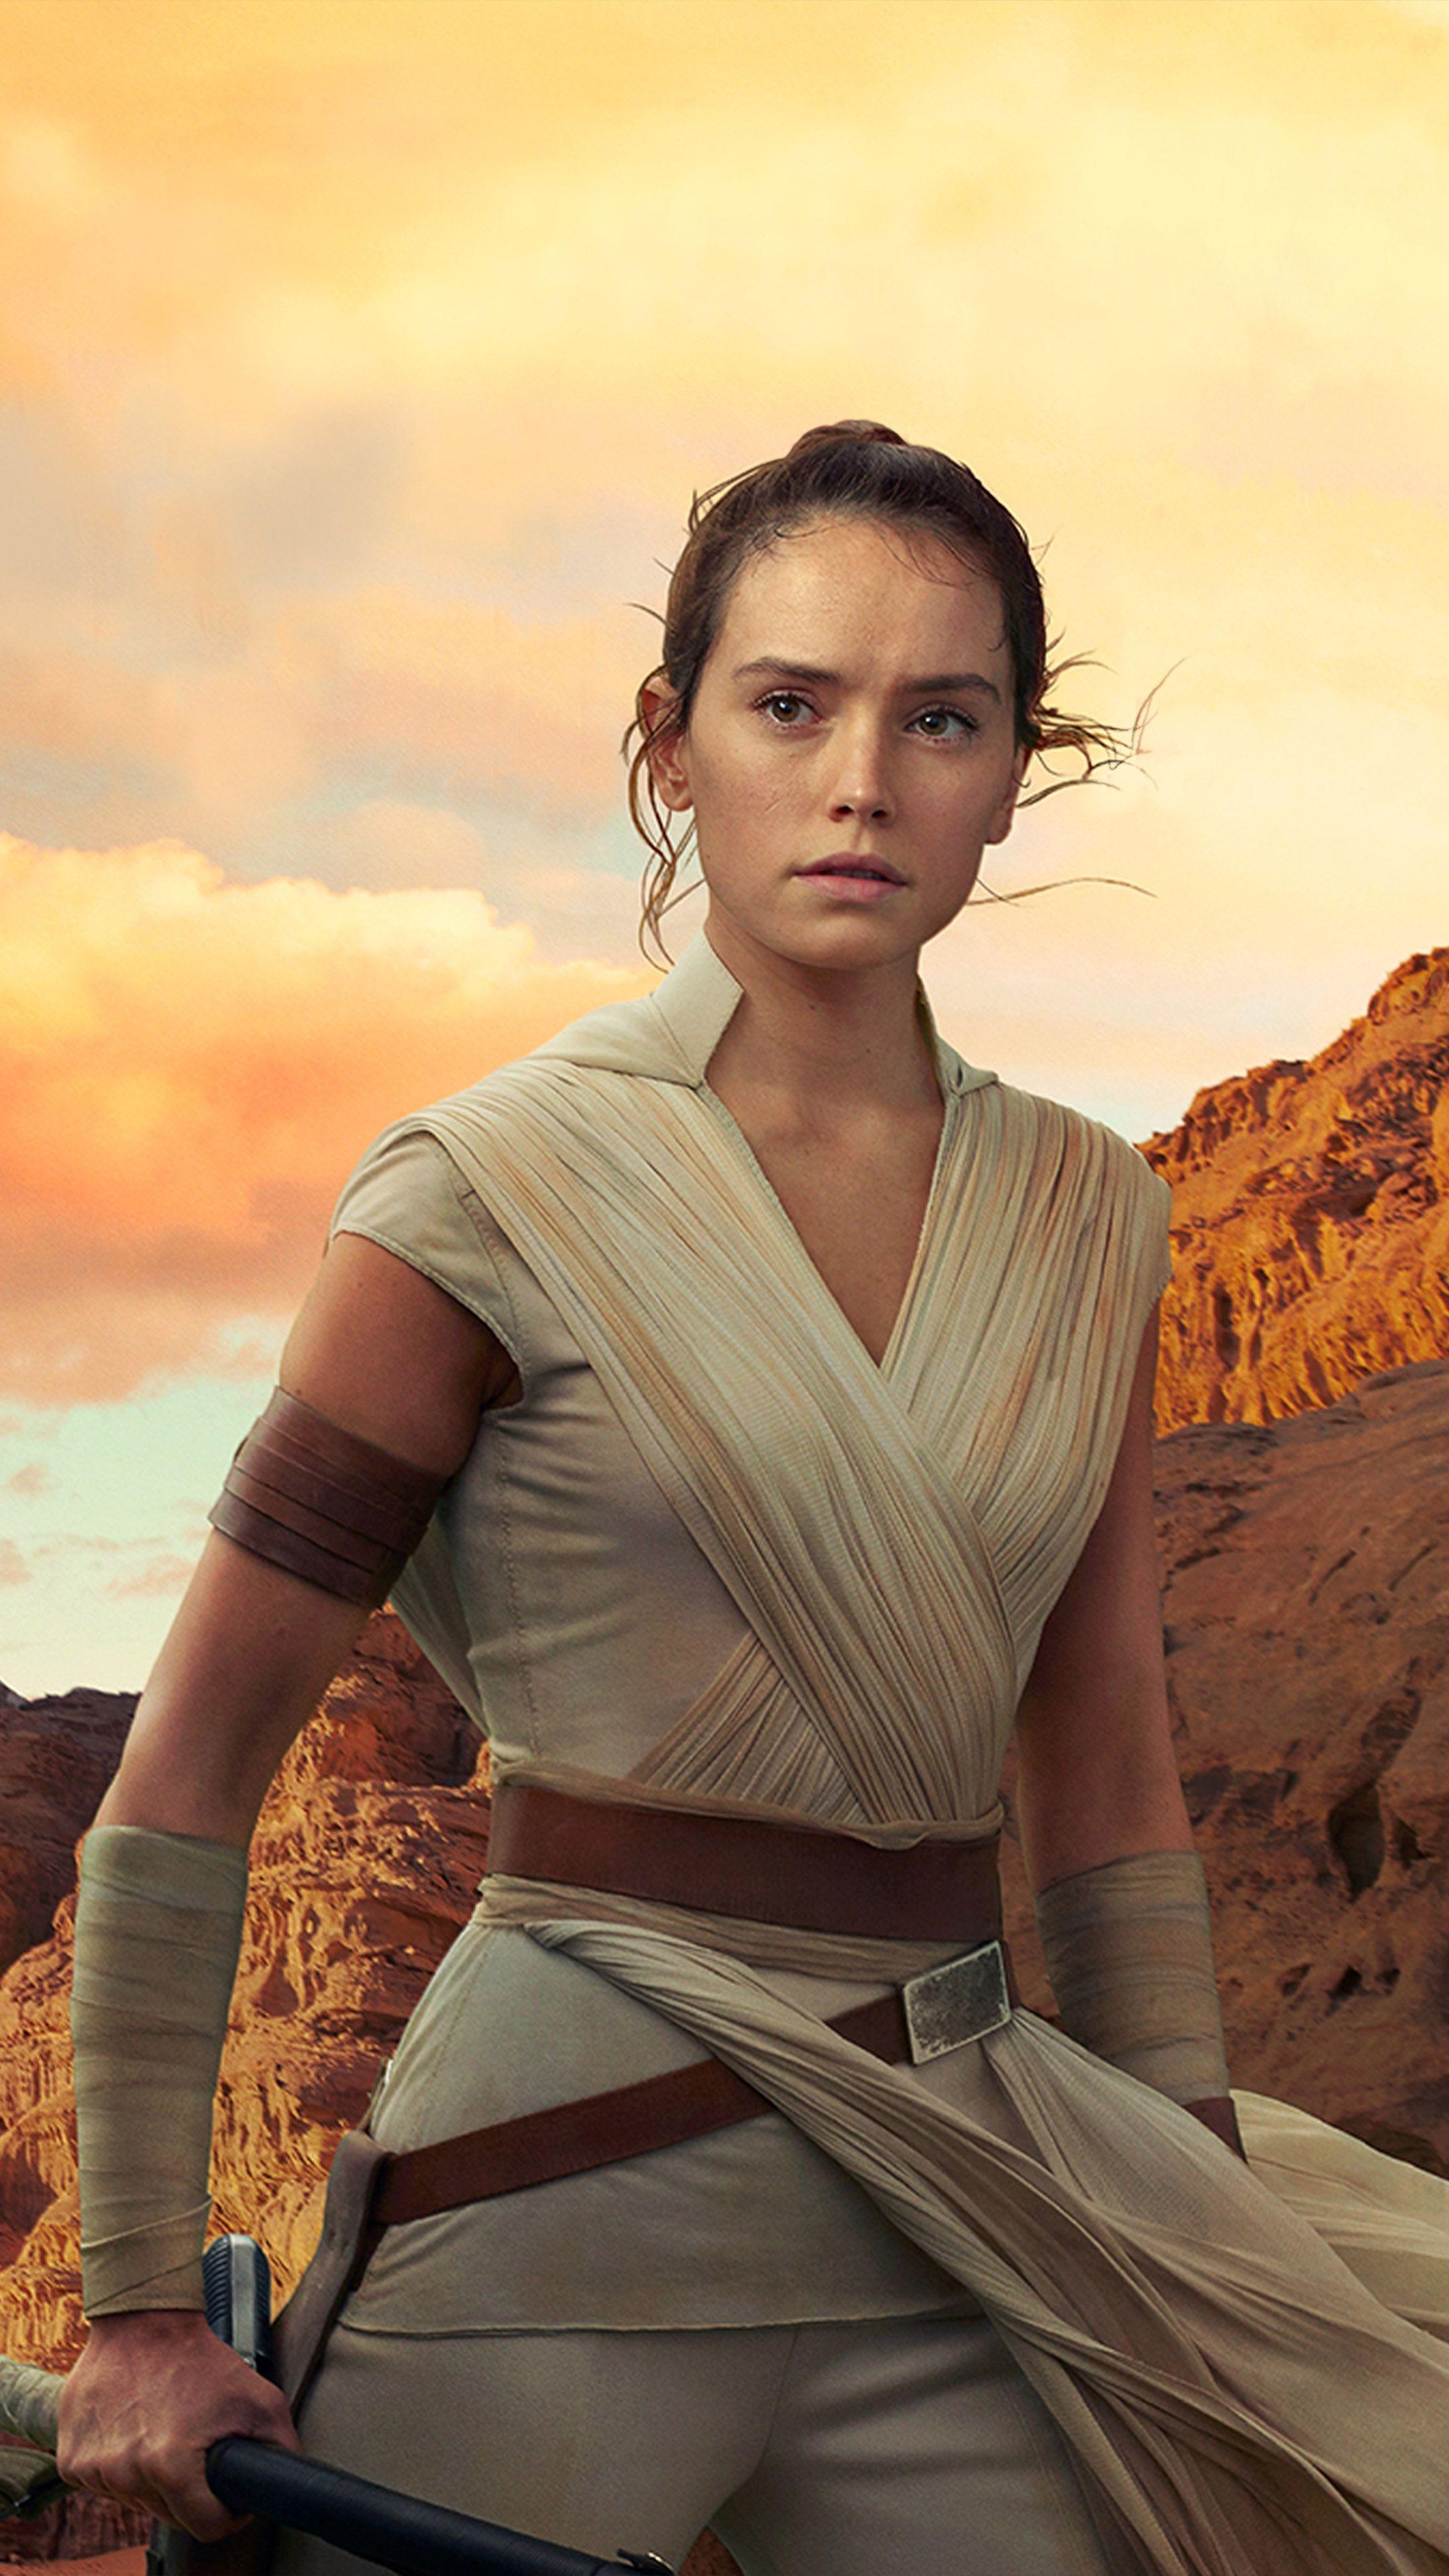 Daisy Ridley In Star Wars The Rise of Skywalker. Daisy ridley star wars, Star wars picture, Rey star wars